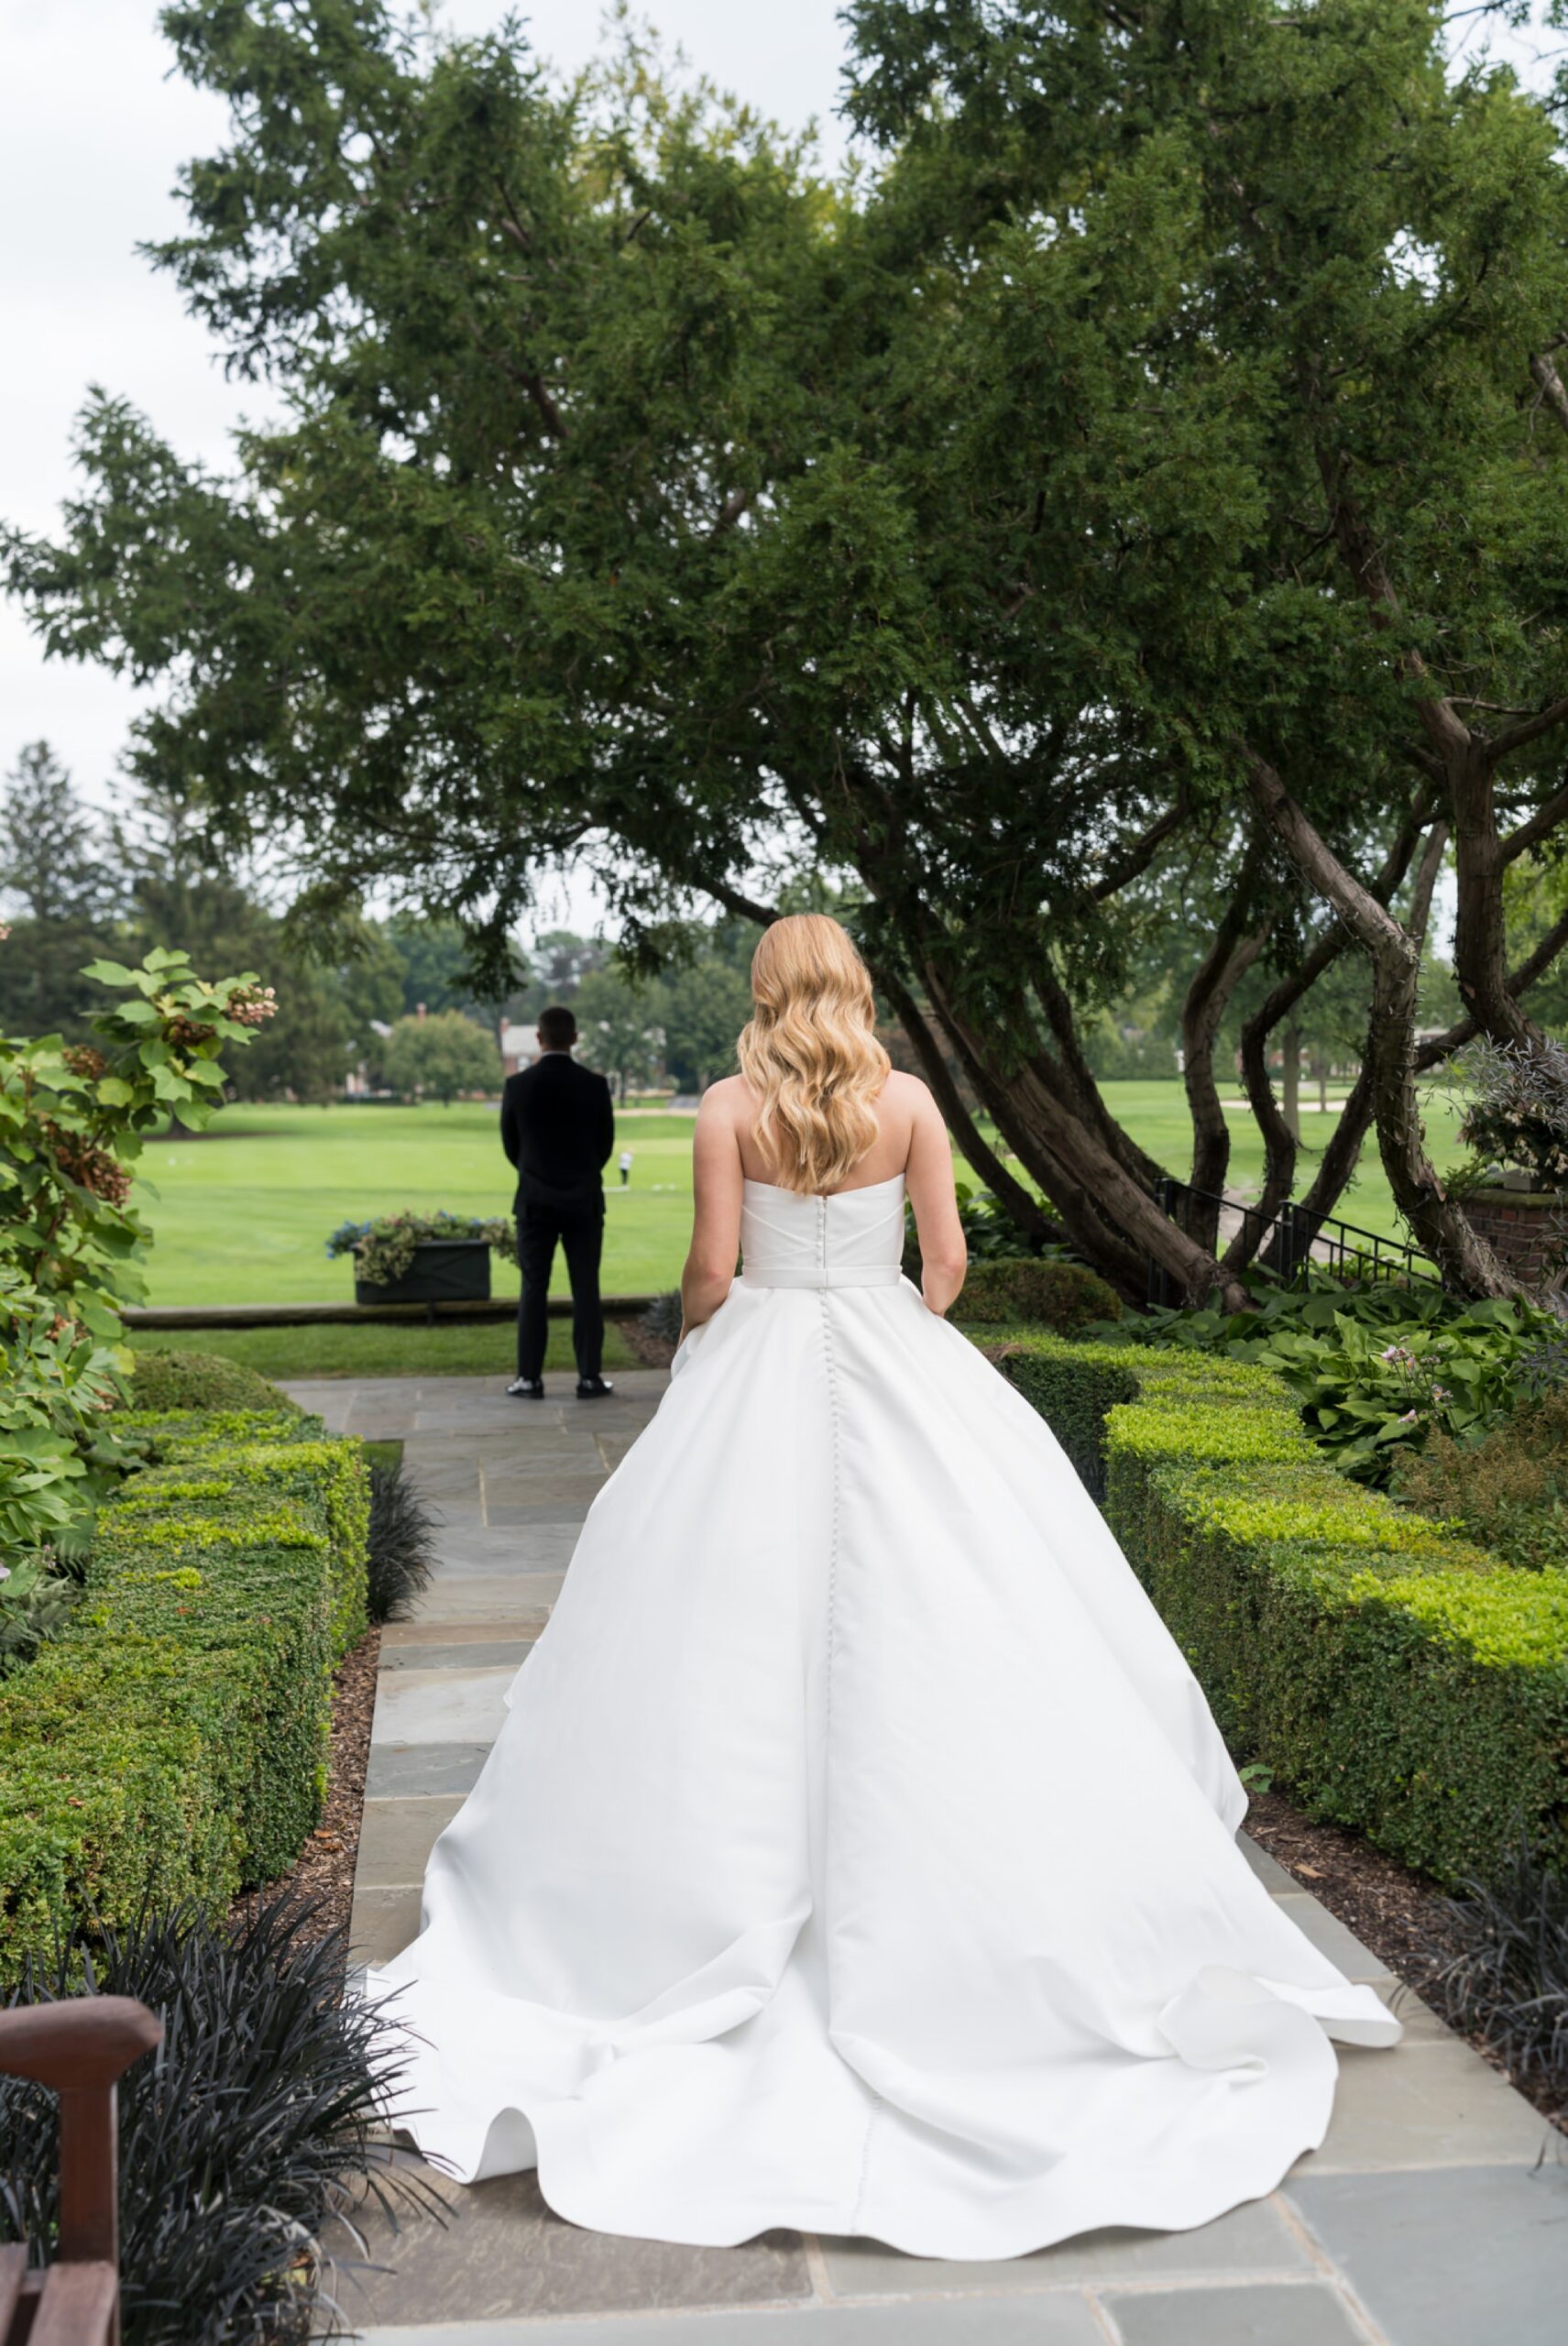 A first look between the bride and groom at their Country Club of Detroit wedding.  